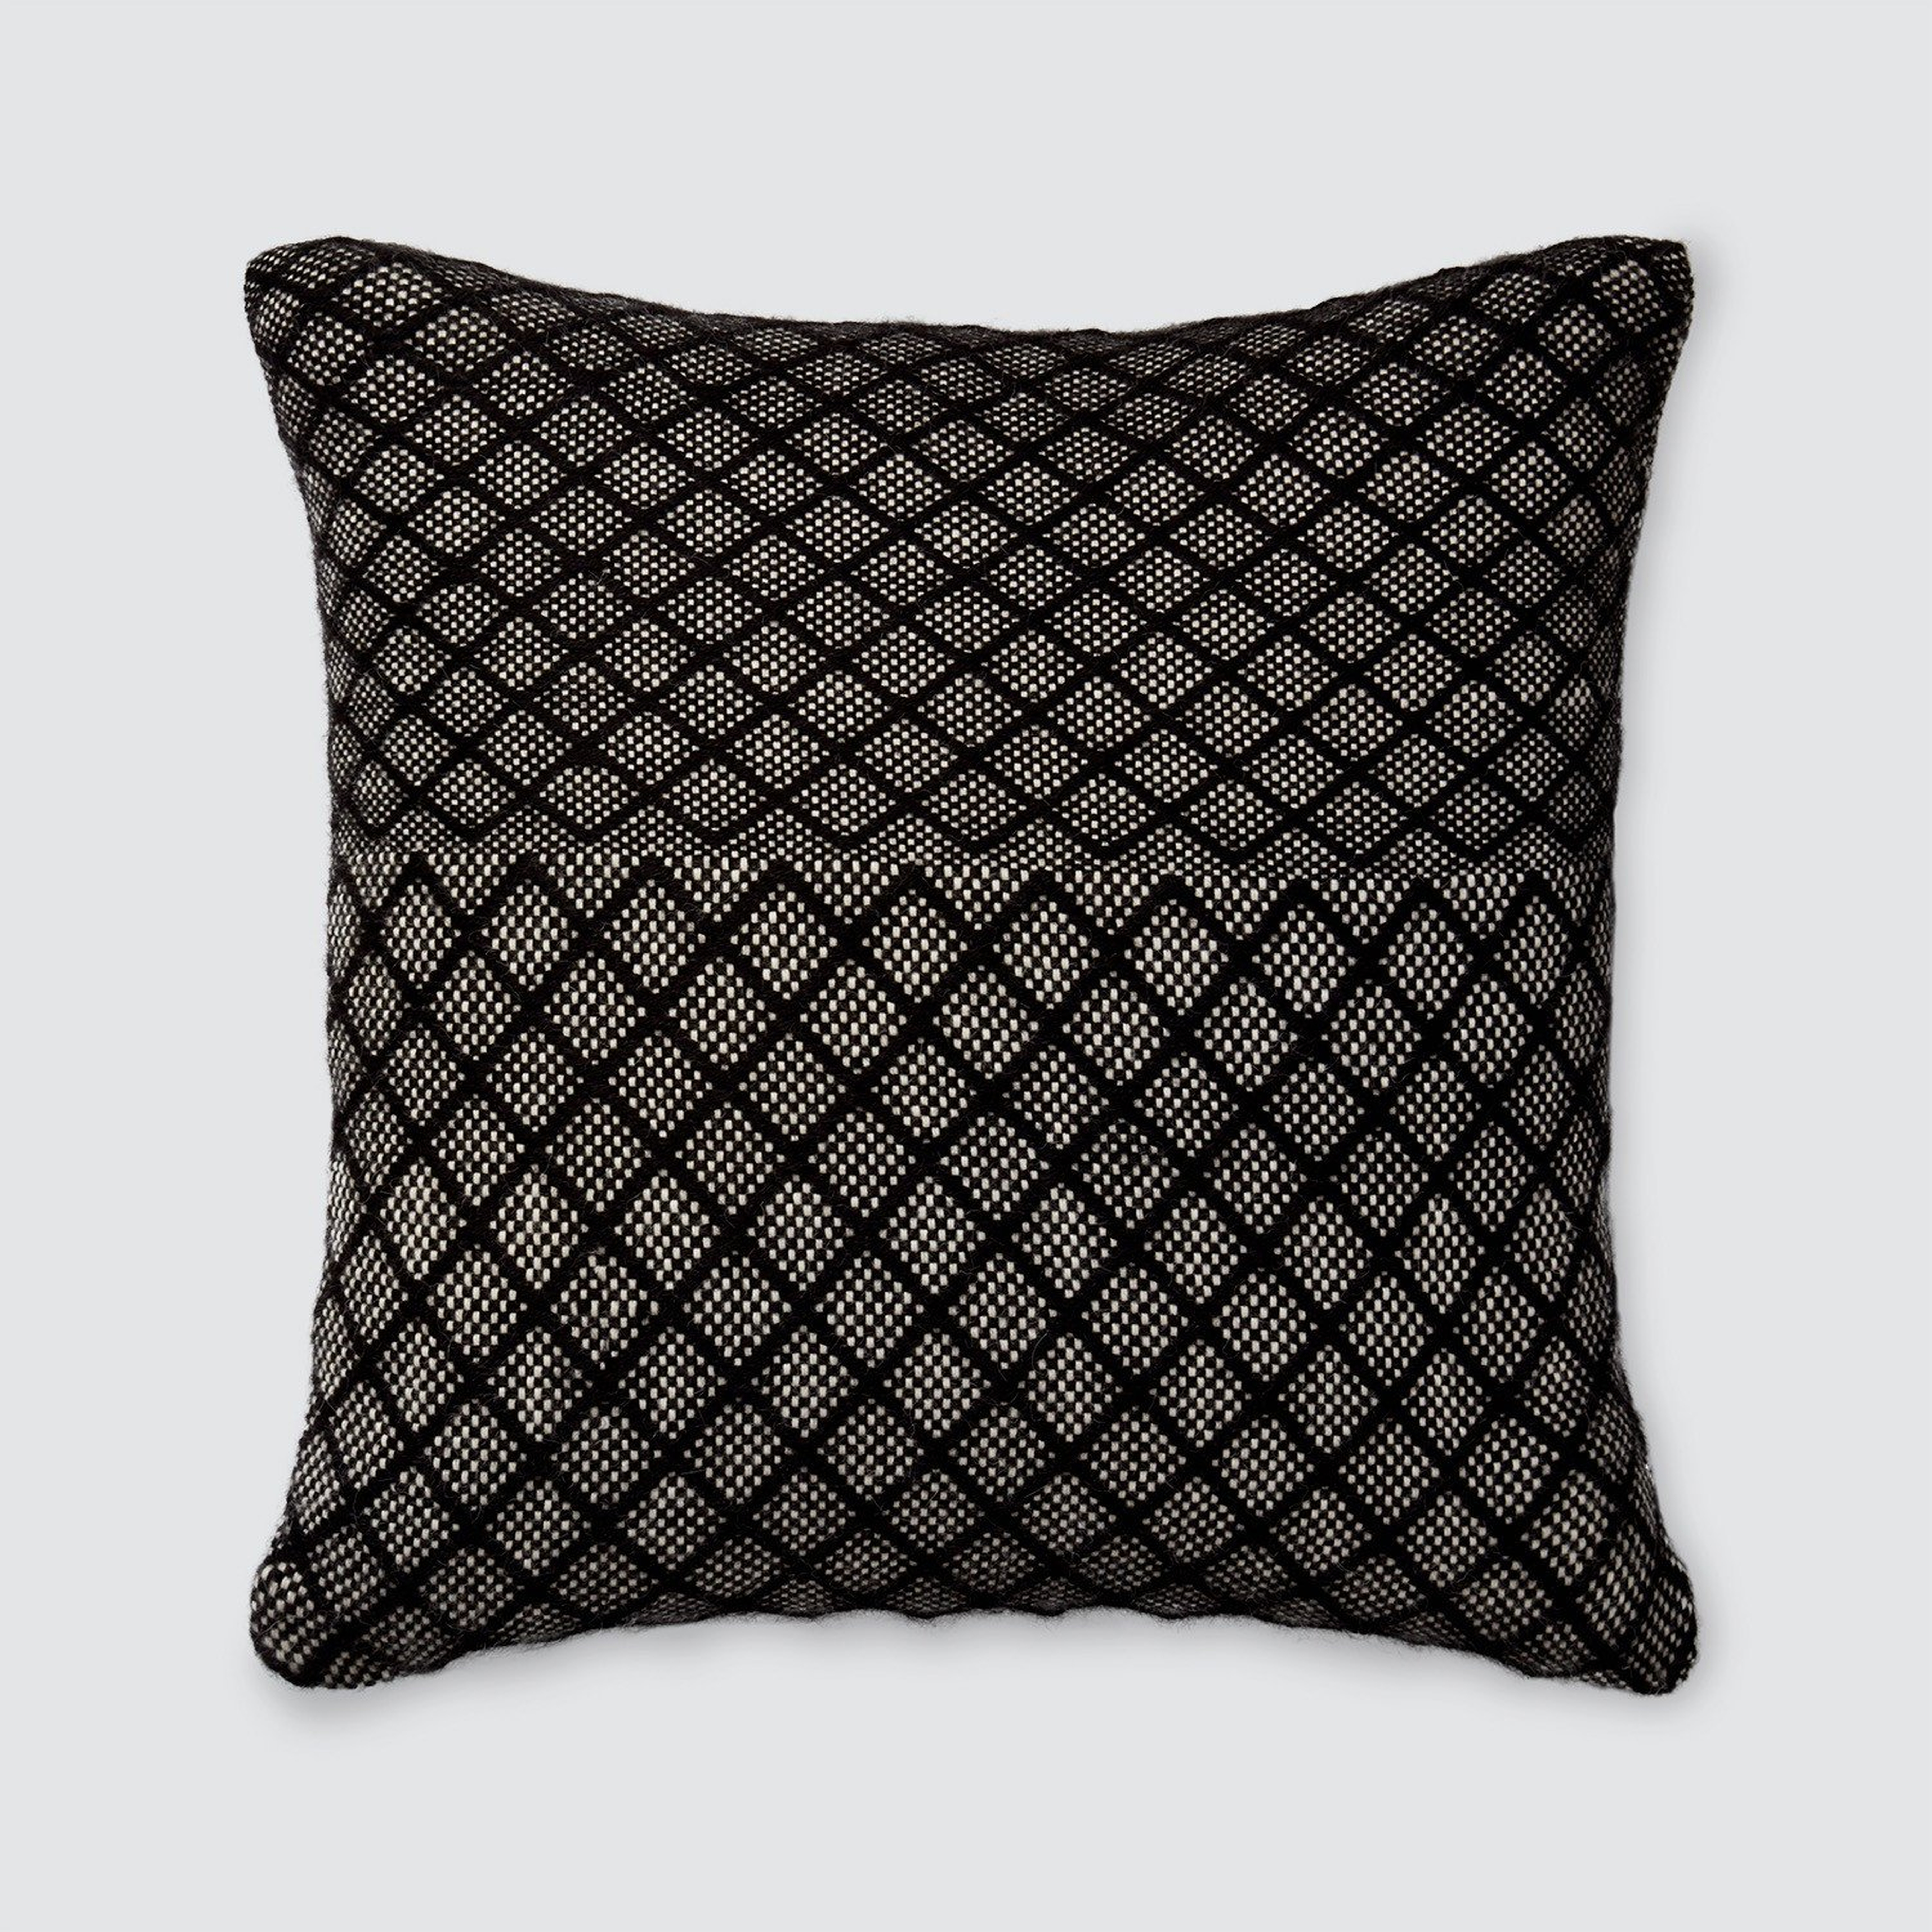 Milagro Pillow - Black By The Citizenry - The Citizenry